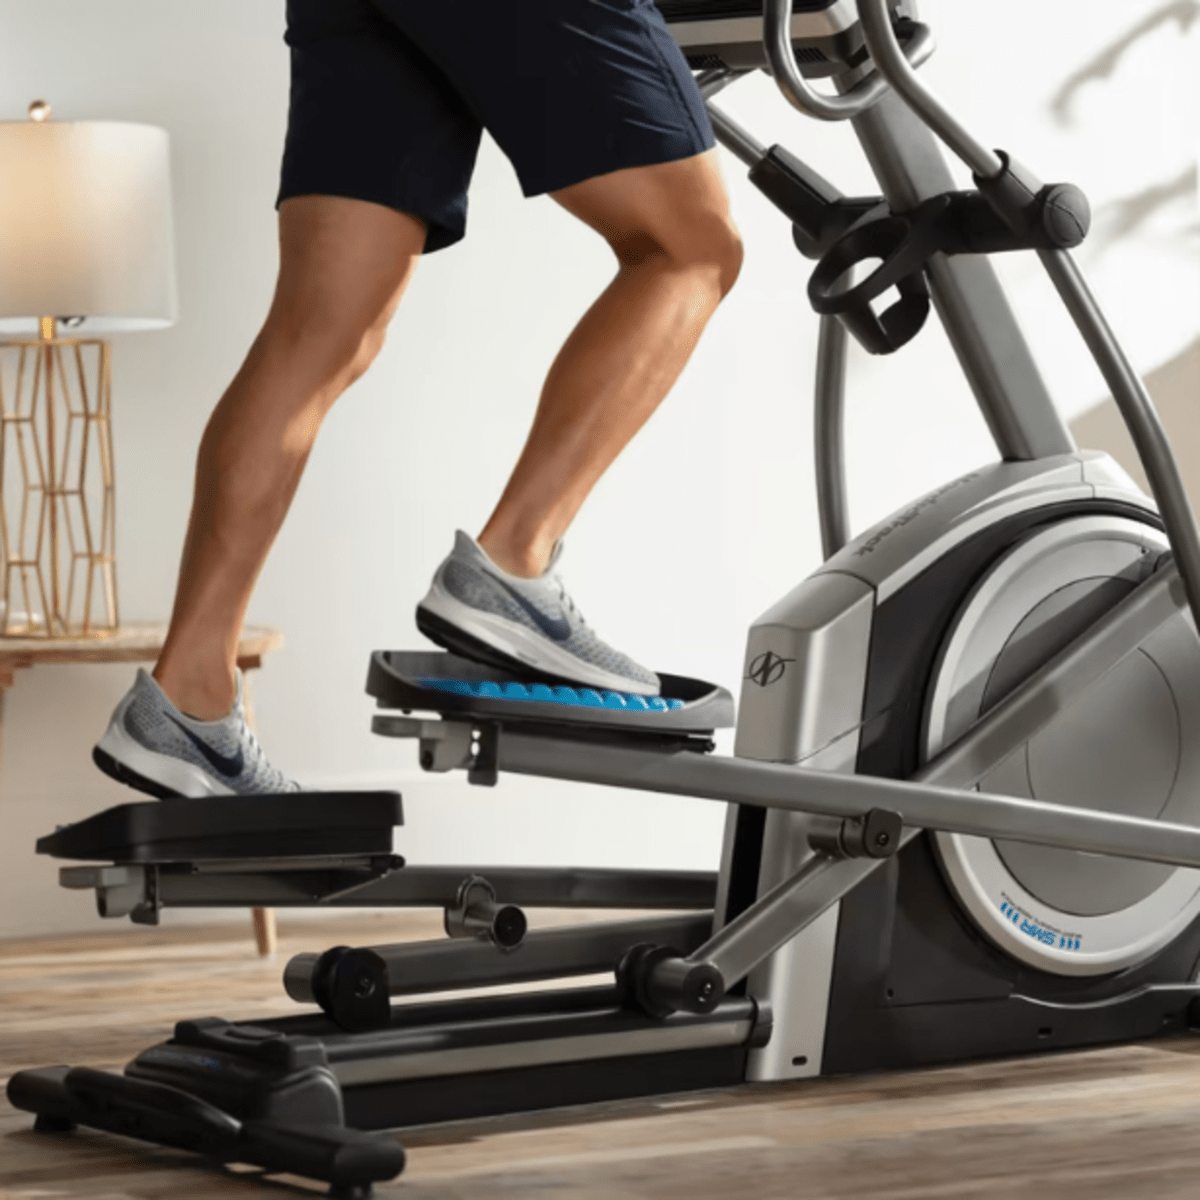 FITNESS WAREHOUSE CANADA - Buy & Sell Fitness Equipment & Parts